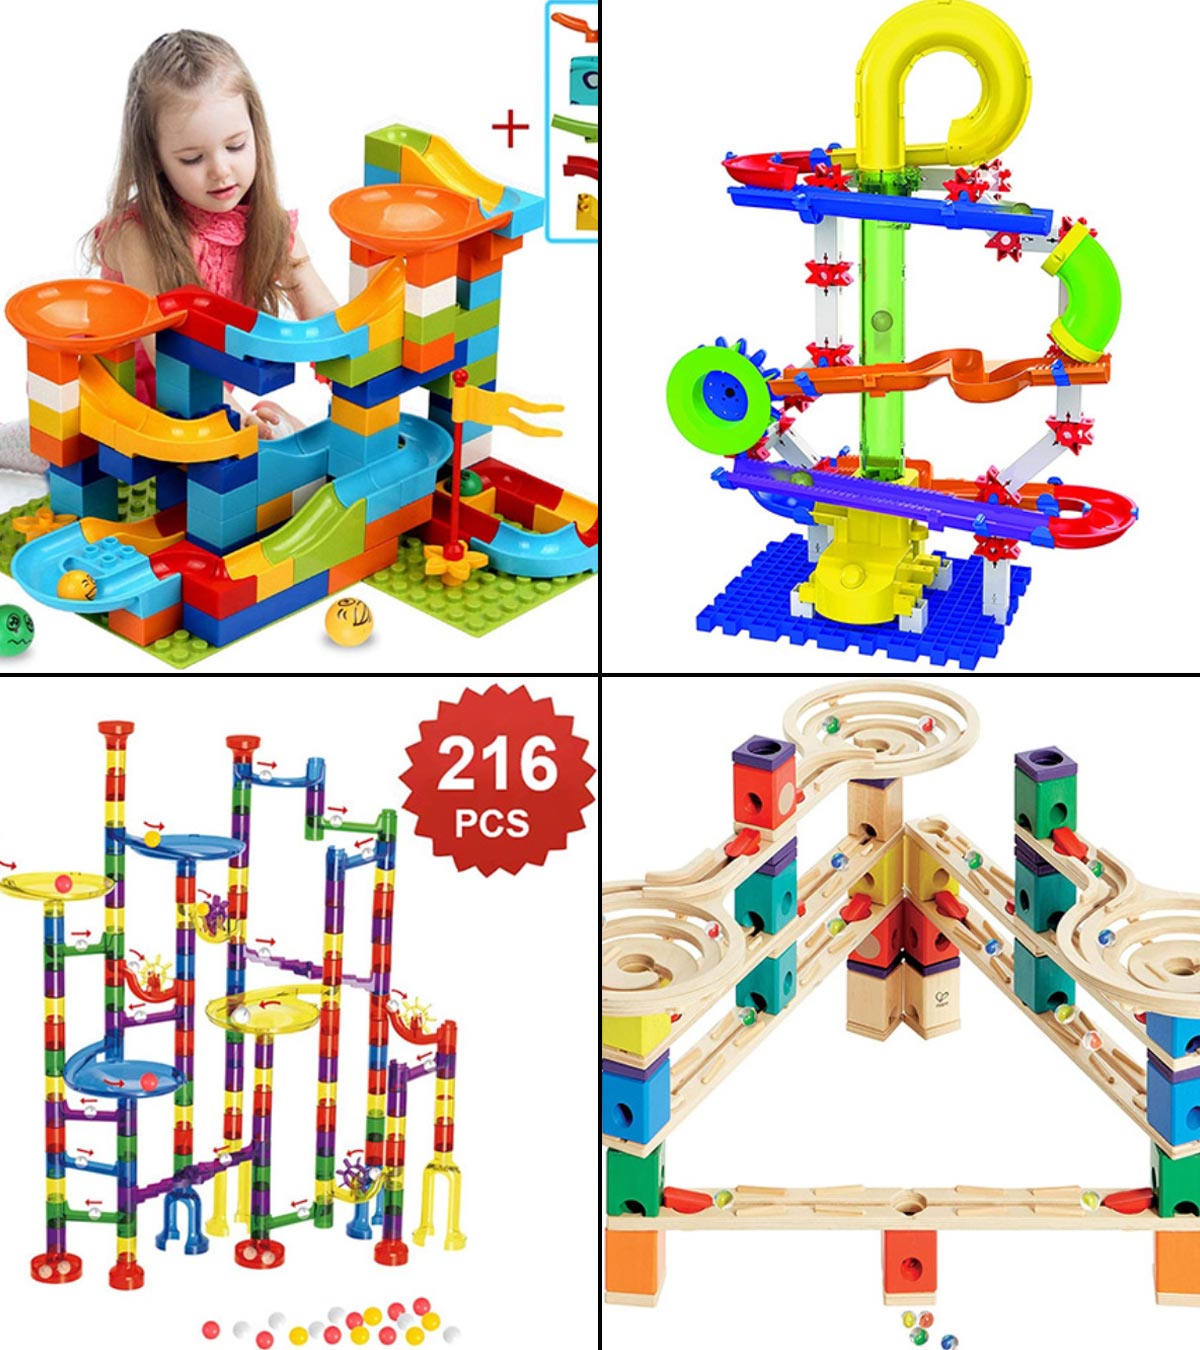 best marble run for adults